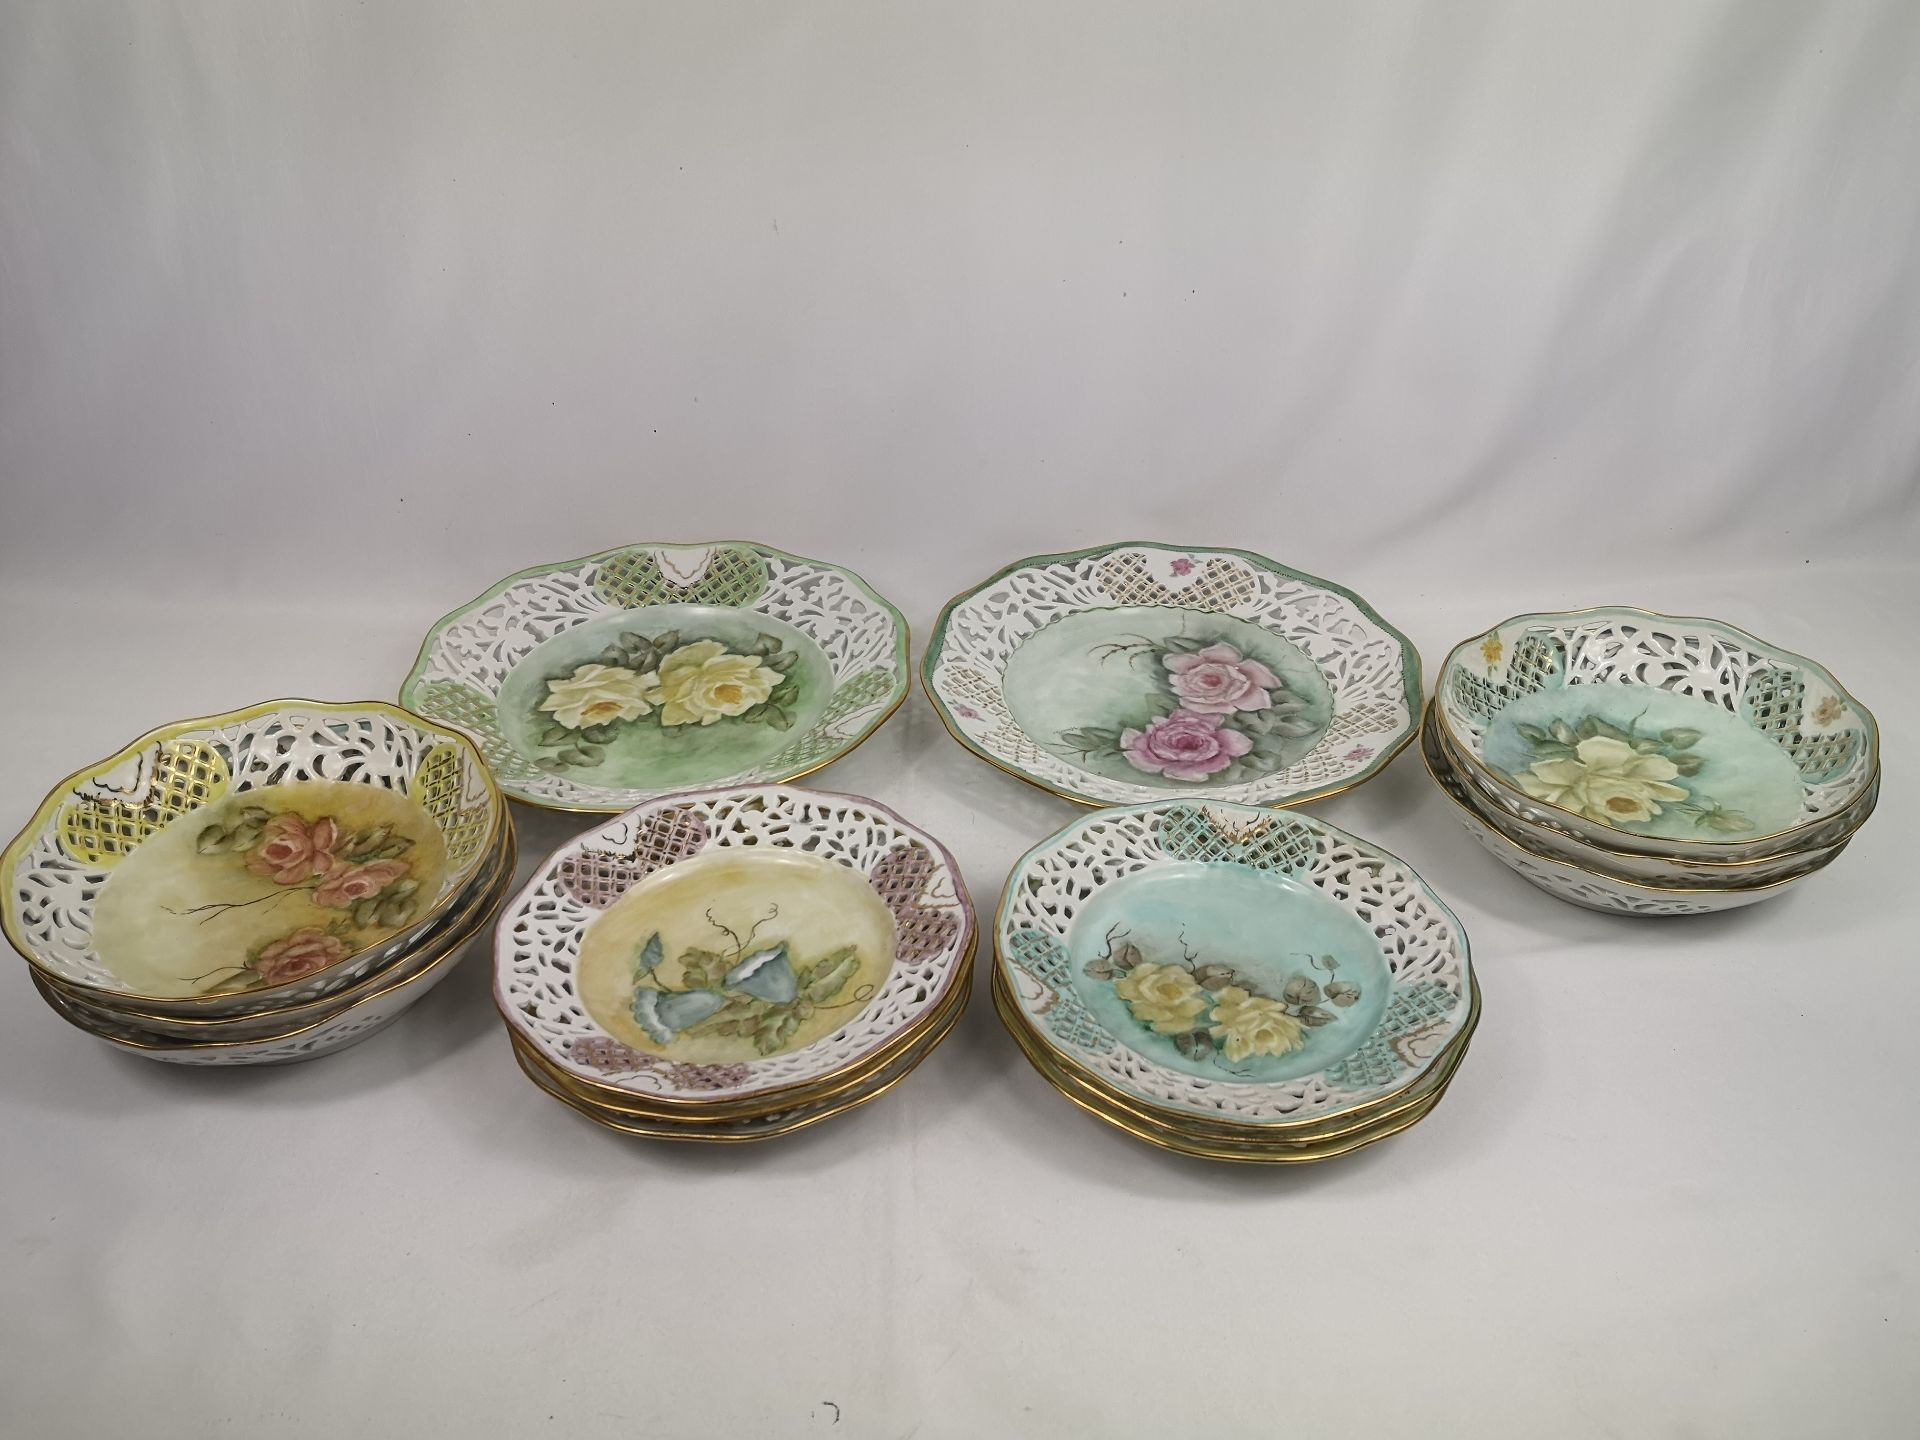 Quantity of hand painted plates and bowls by Marjorie Stevenson